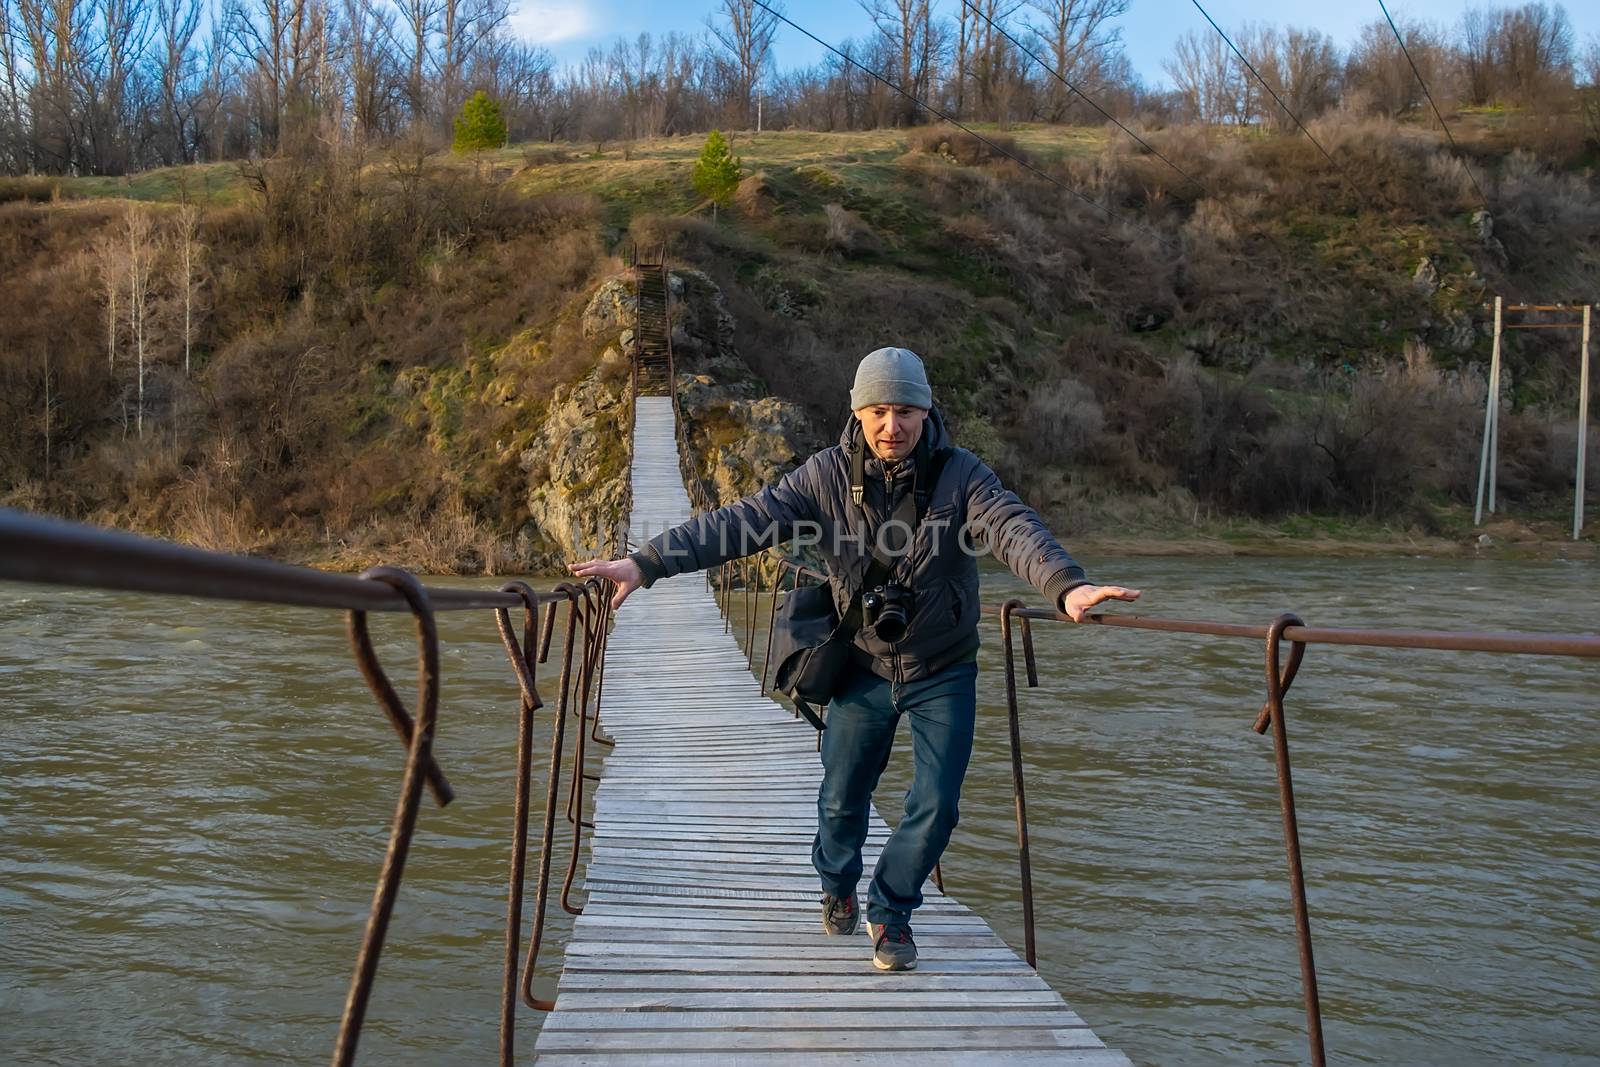 photographer, is afraid and runs over a swaying suspension bridge by jk3030